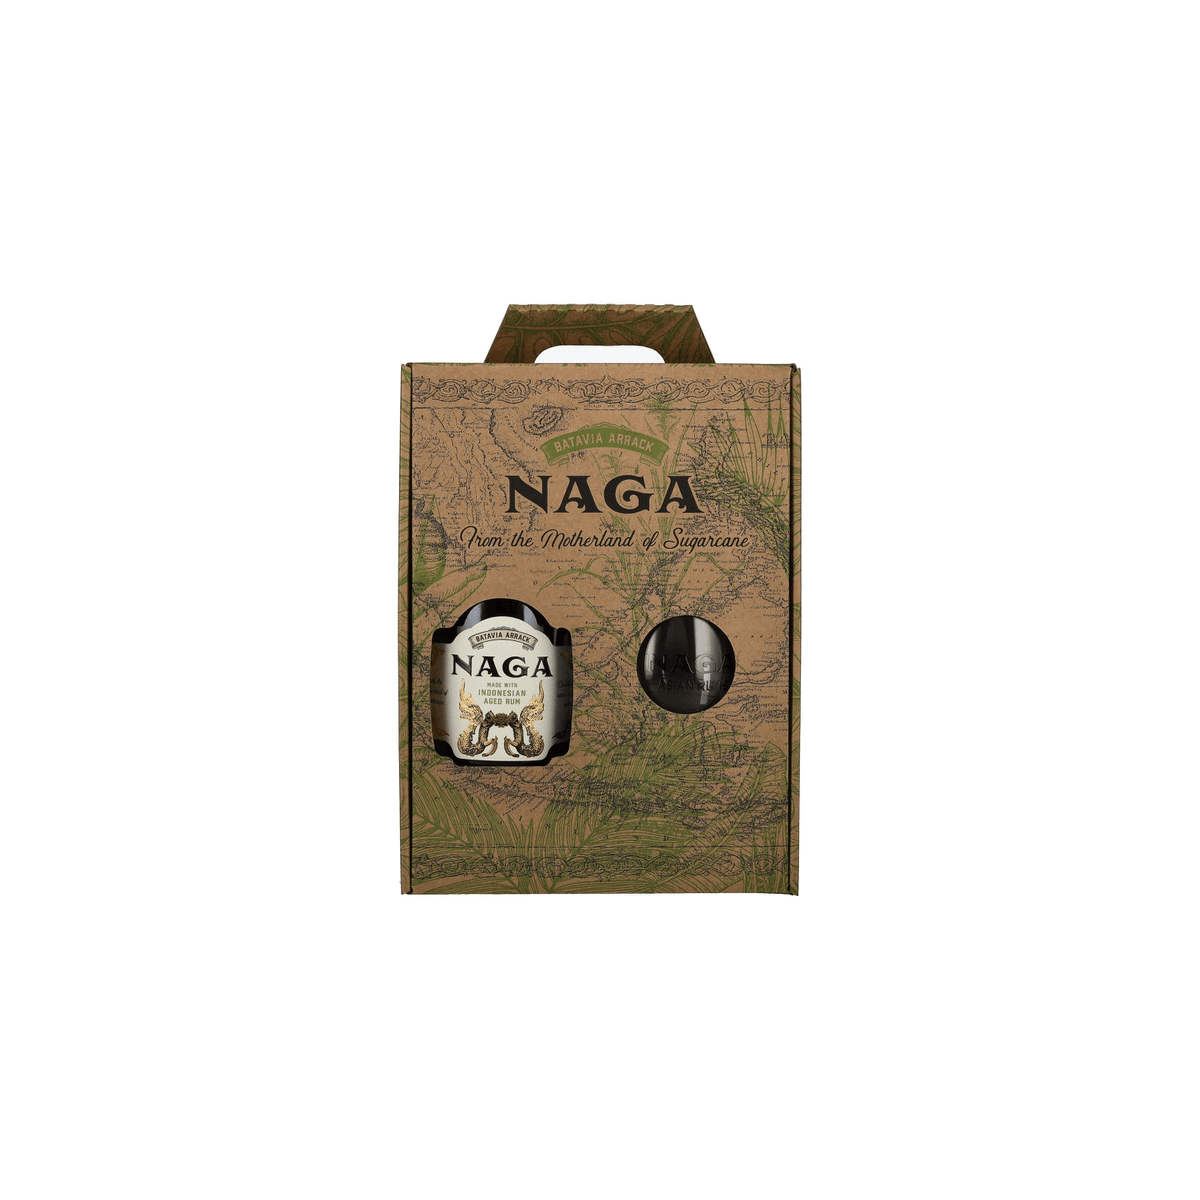 Naga JAVA RESERVE Double Cask Aged 40% Vol. 0,7l in Giftbox with glass